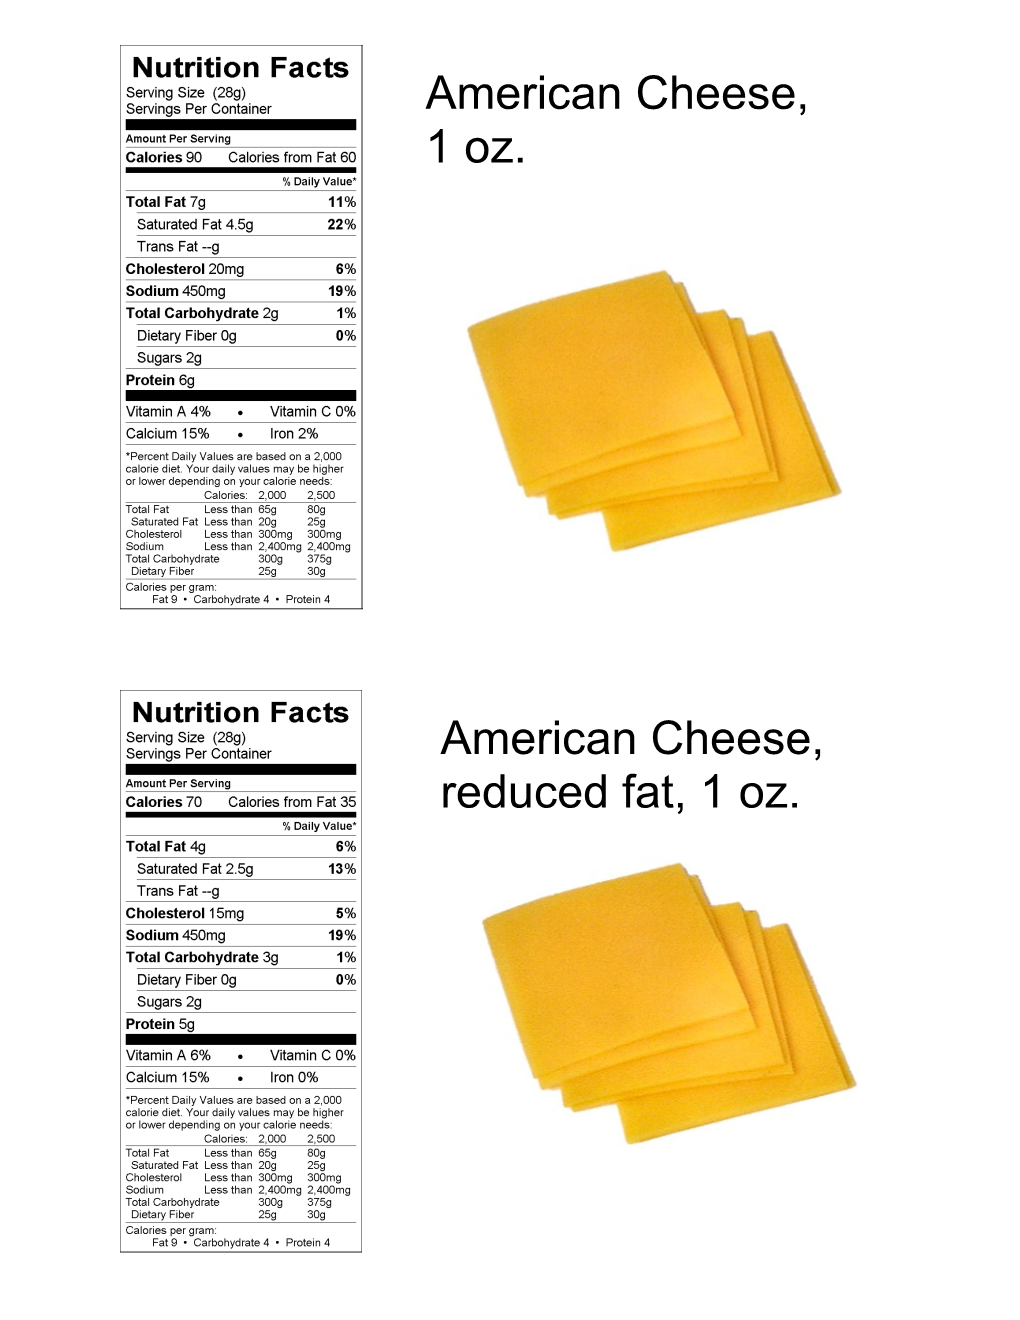 American Cheese, 1 Oz. American Cheese, Reduced Fat, 1